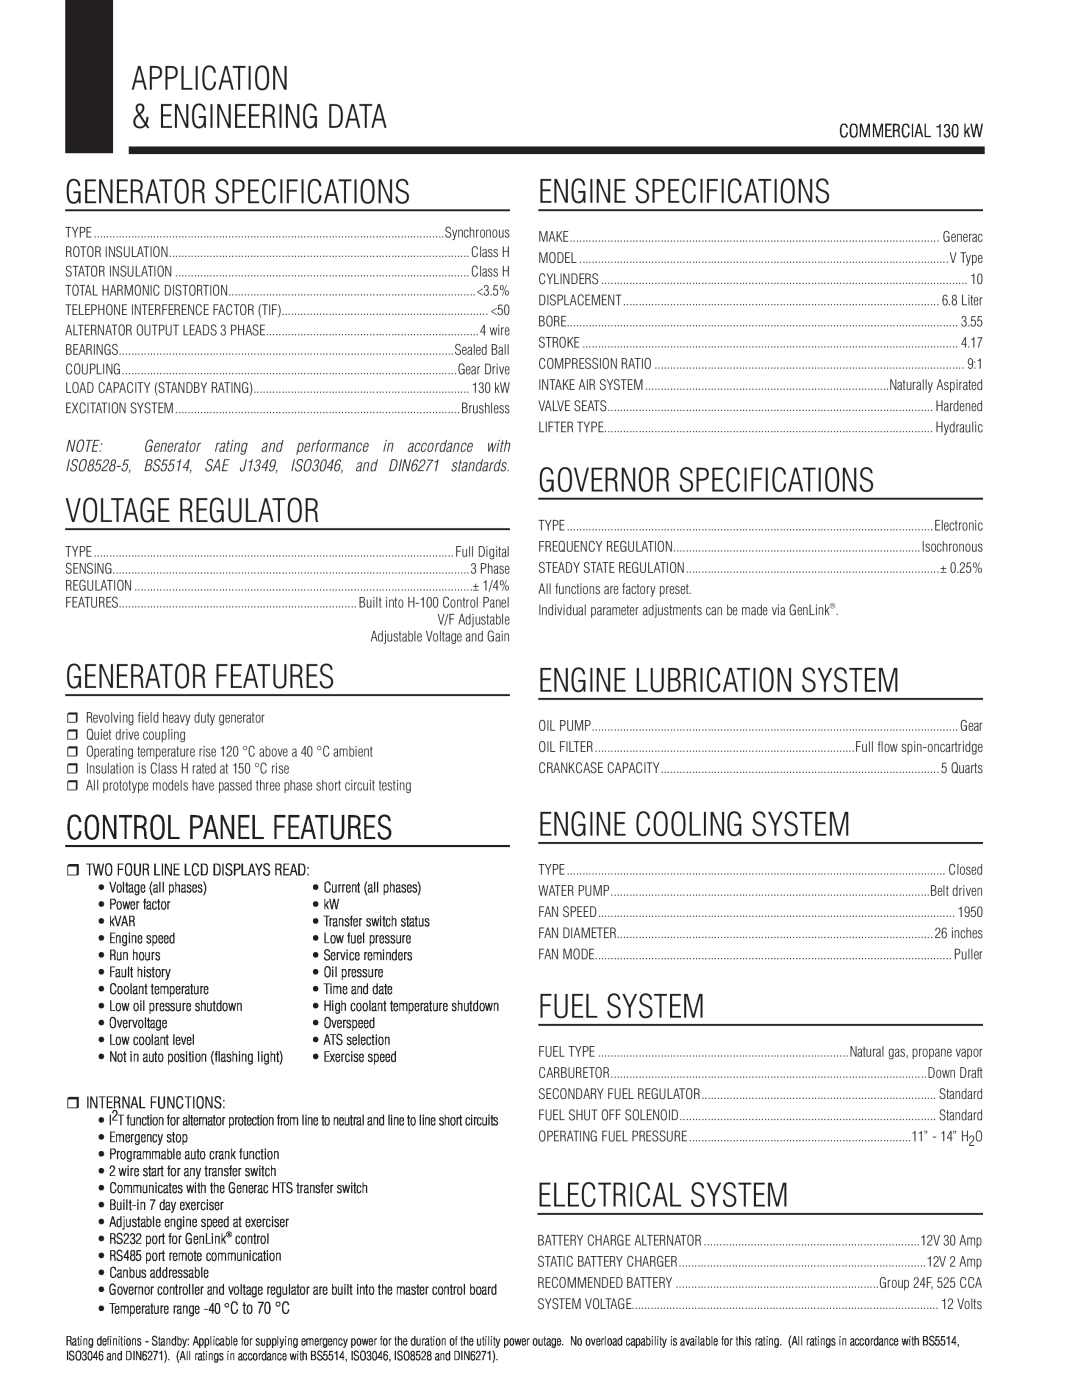 Generac Power Systems None manual Application & Engineering Data 